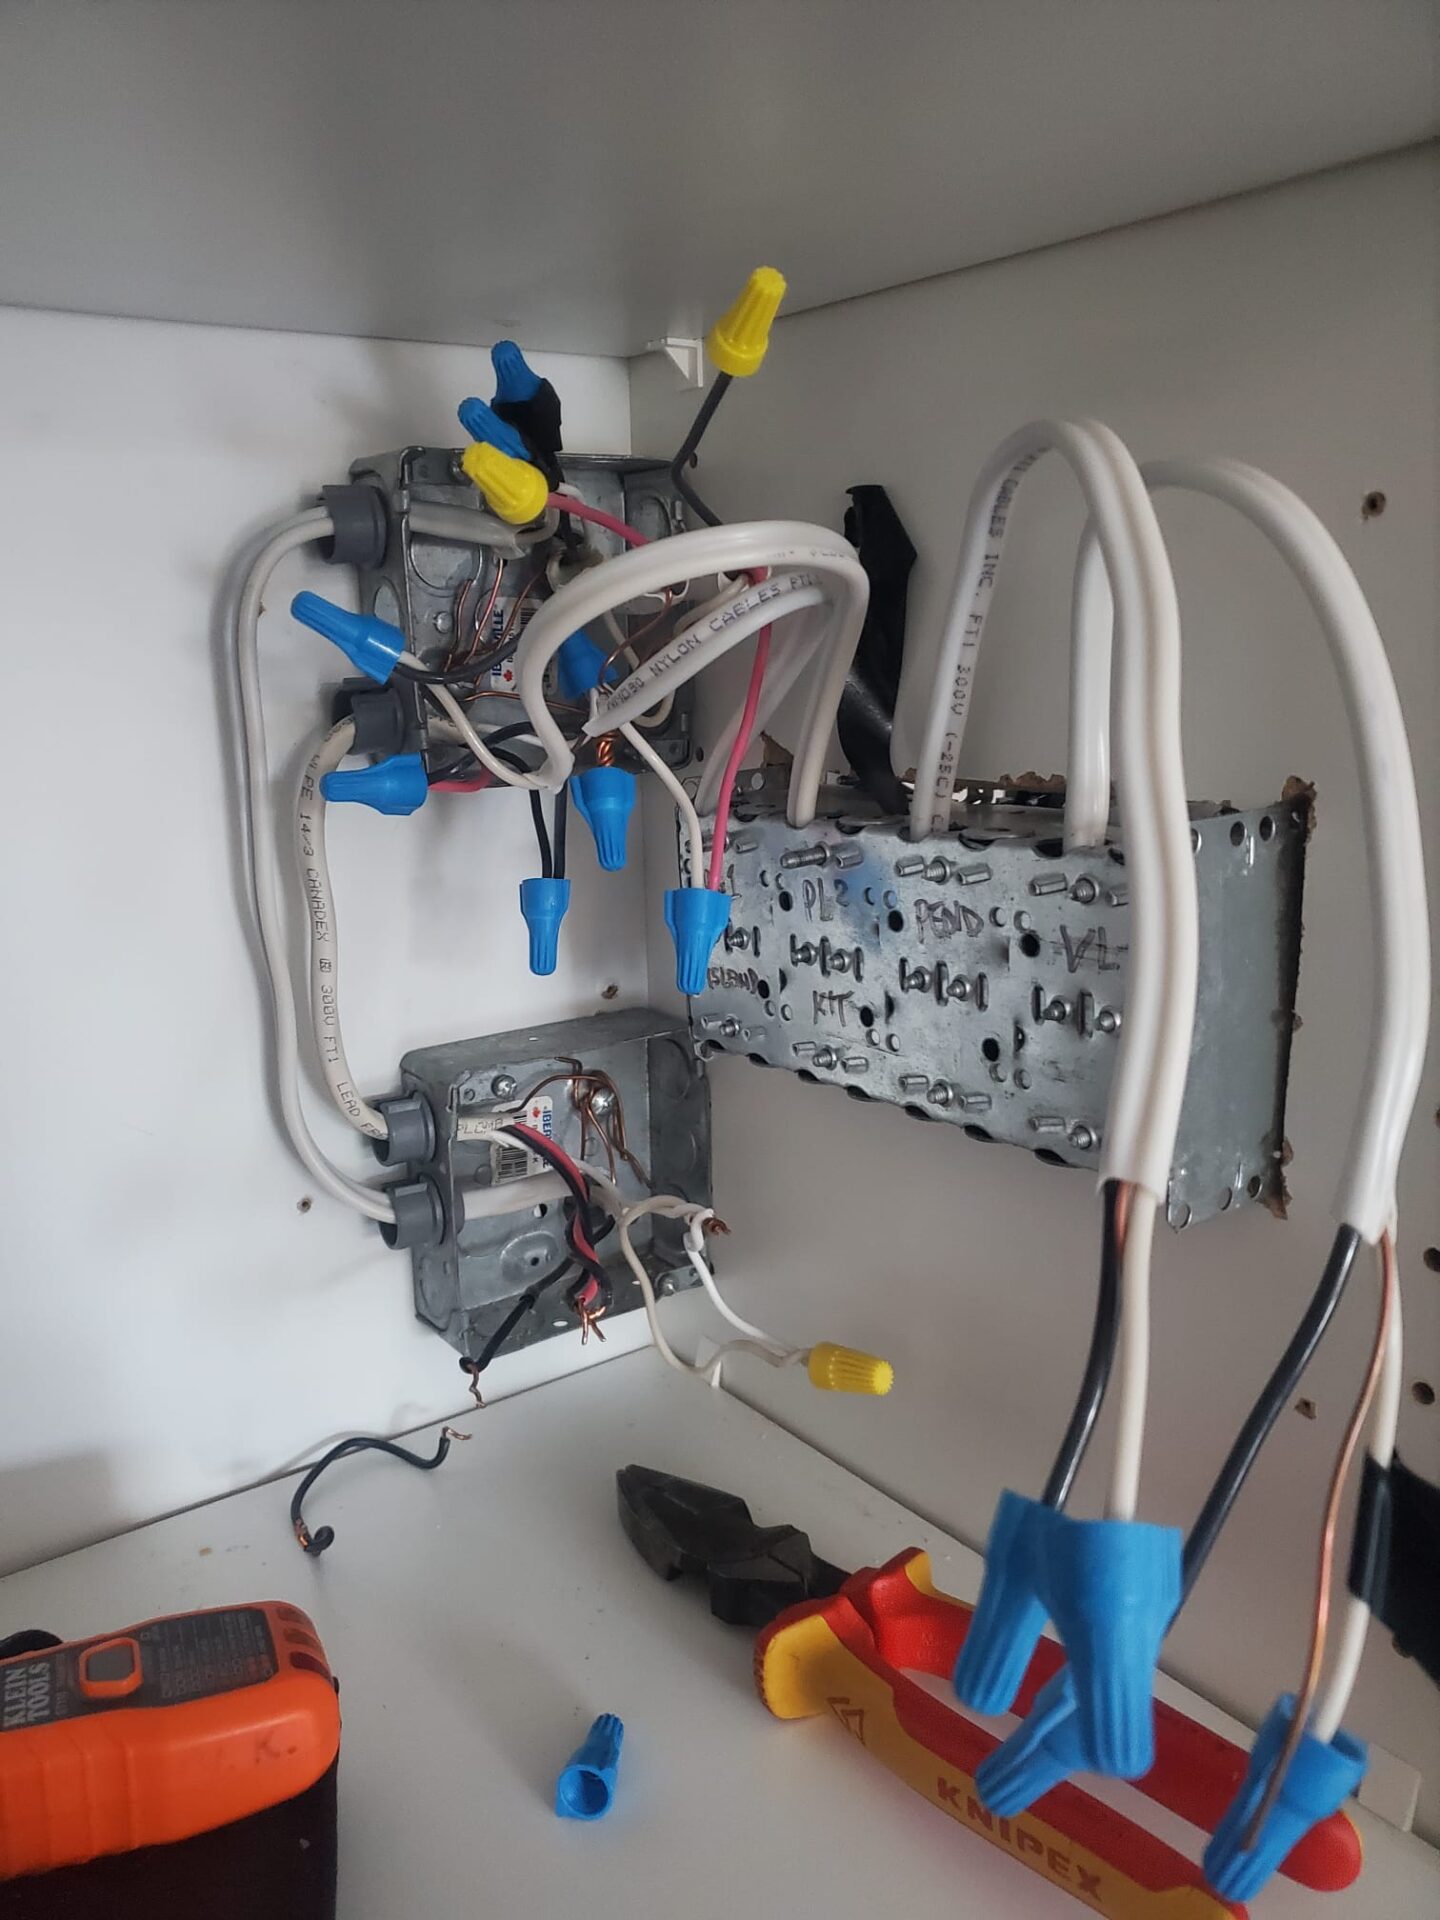 An electrical installation in progress with wires, wire nuts, junction boxes, and tools like screwdrivers and a voltage tester on a white surface.